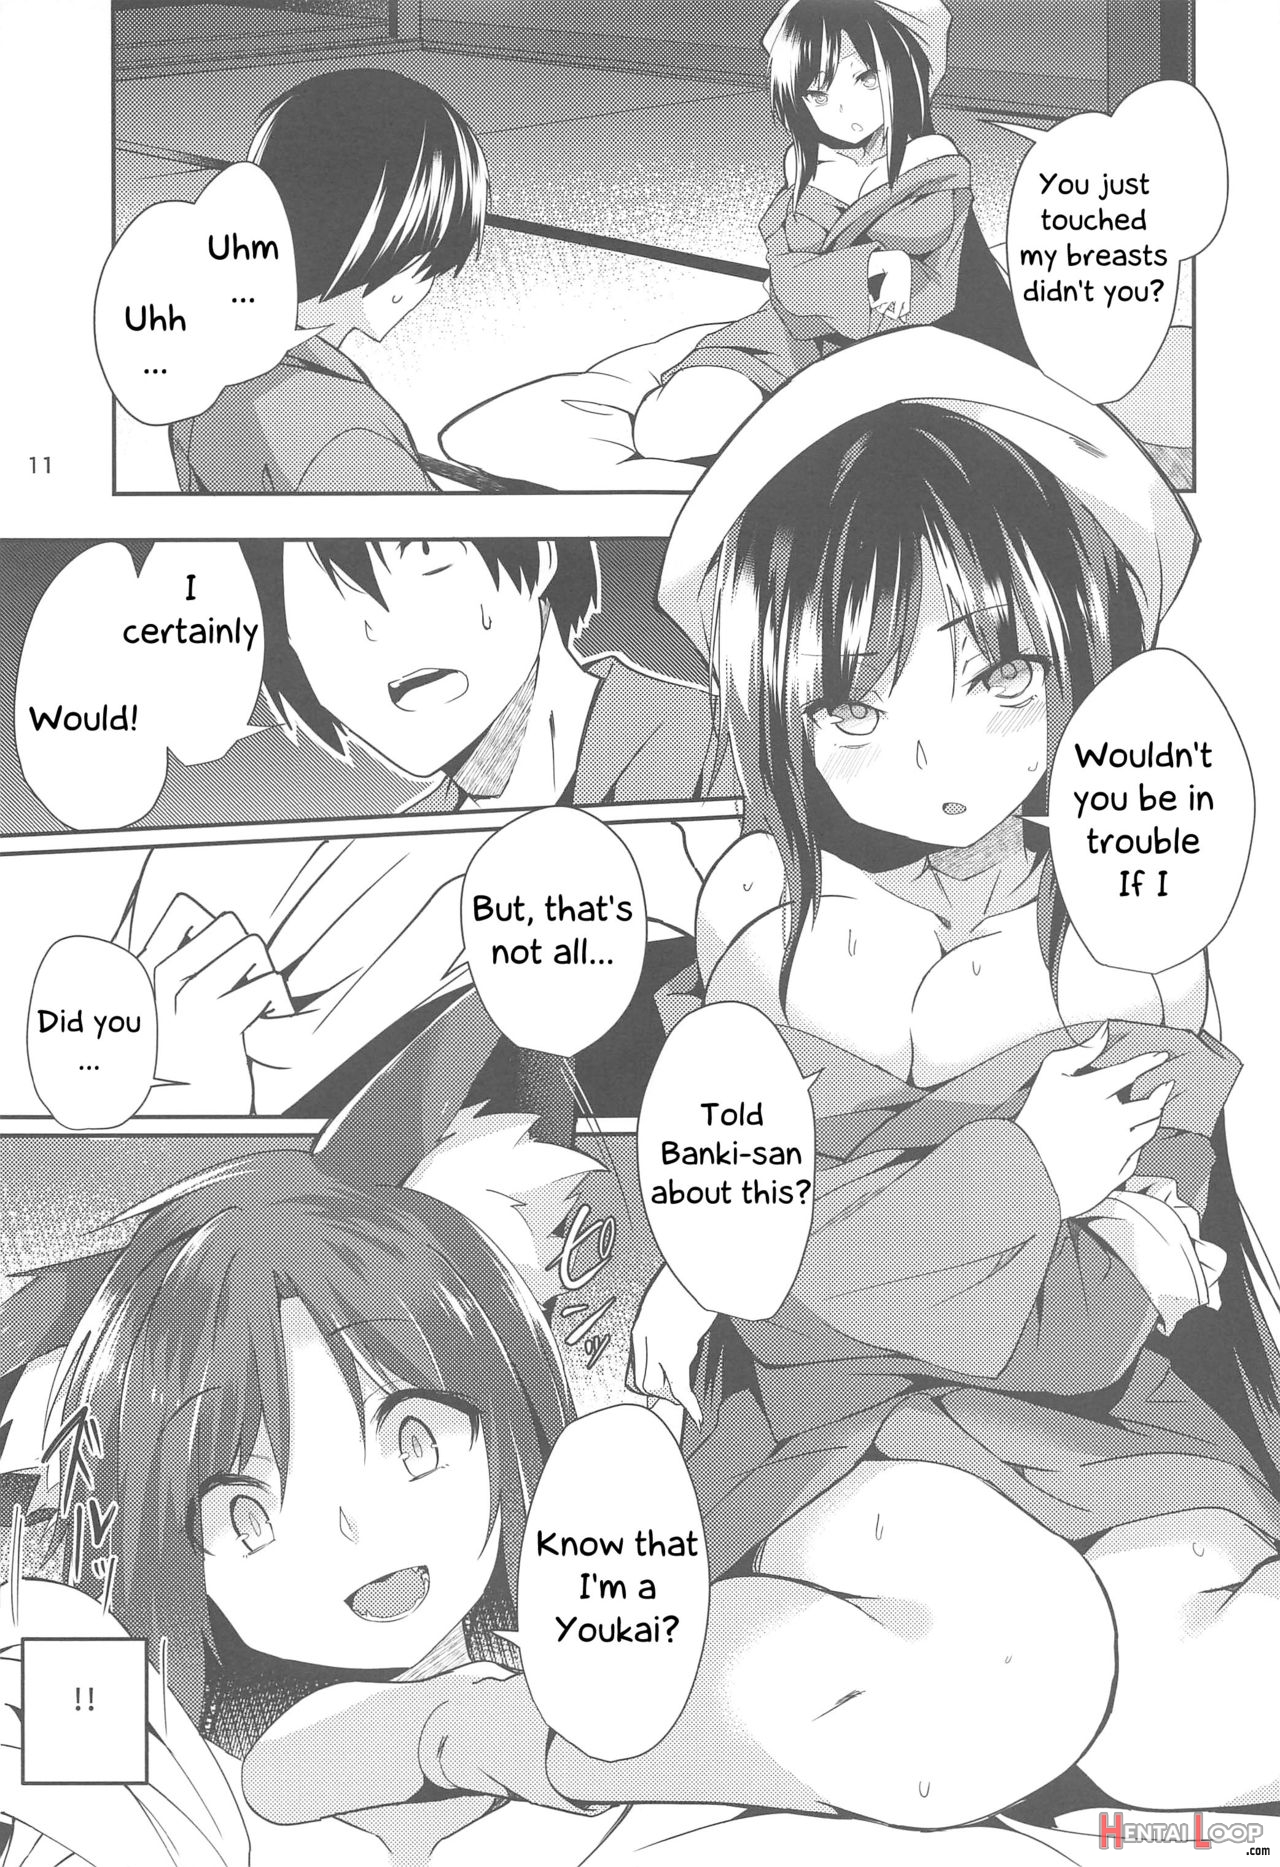 Kagerou's Human Exposure Record page 10